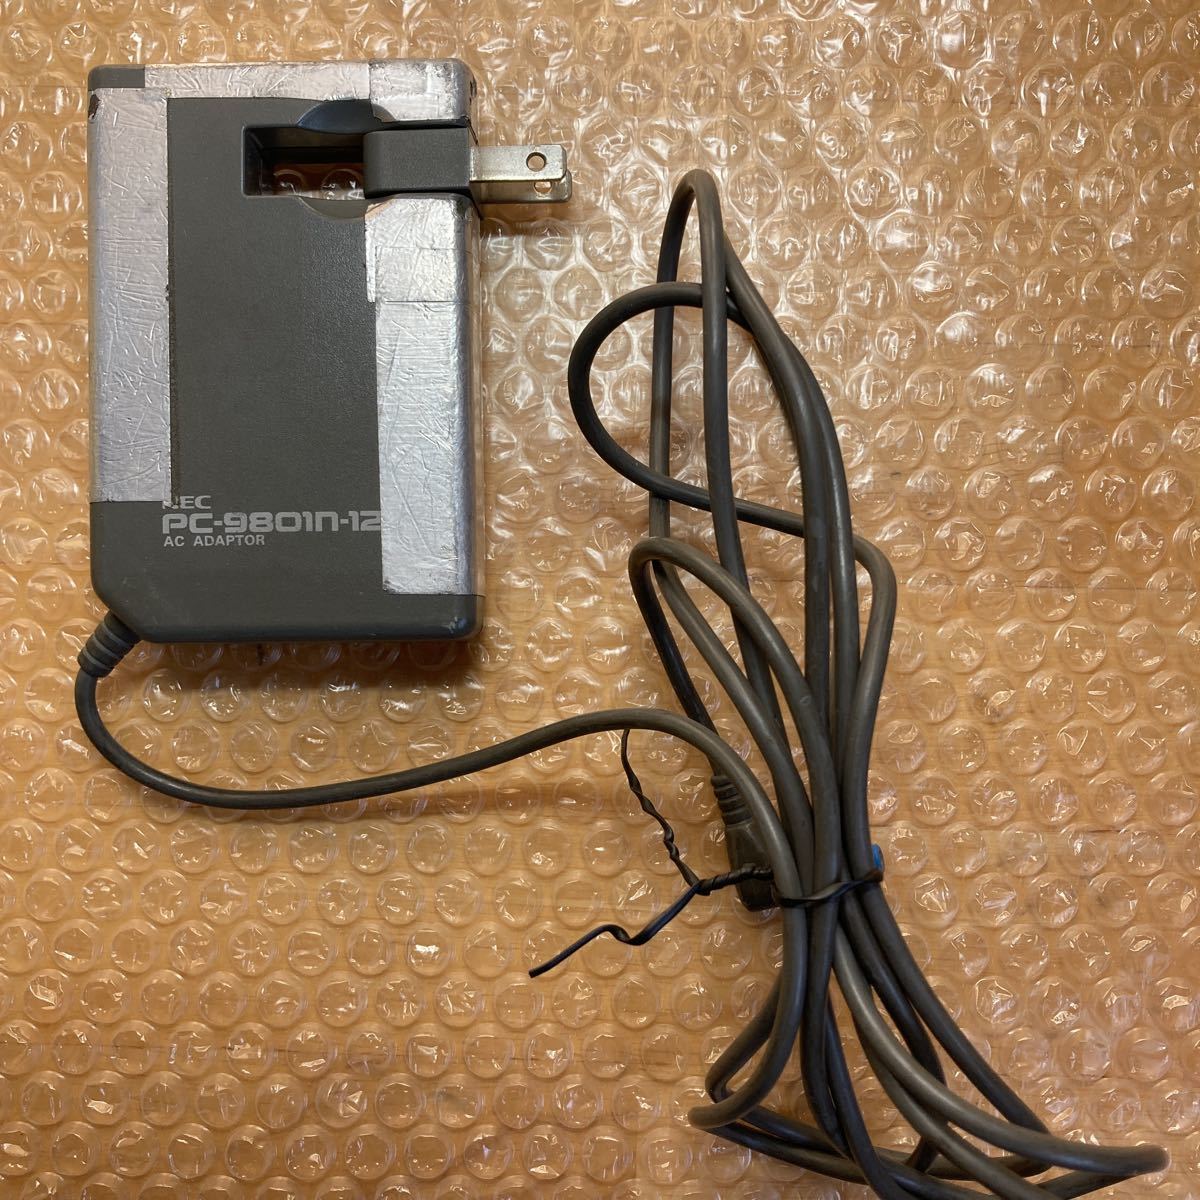 AC adapter NEC PC9801n-12L AC ADAPTOR operation not yet verification / complete junk / disassembly trace equipped 